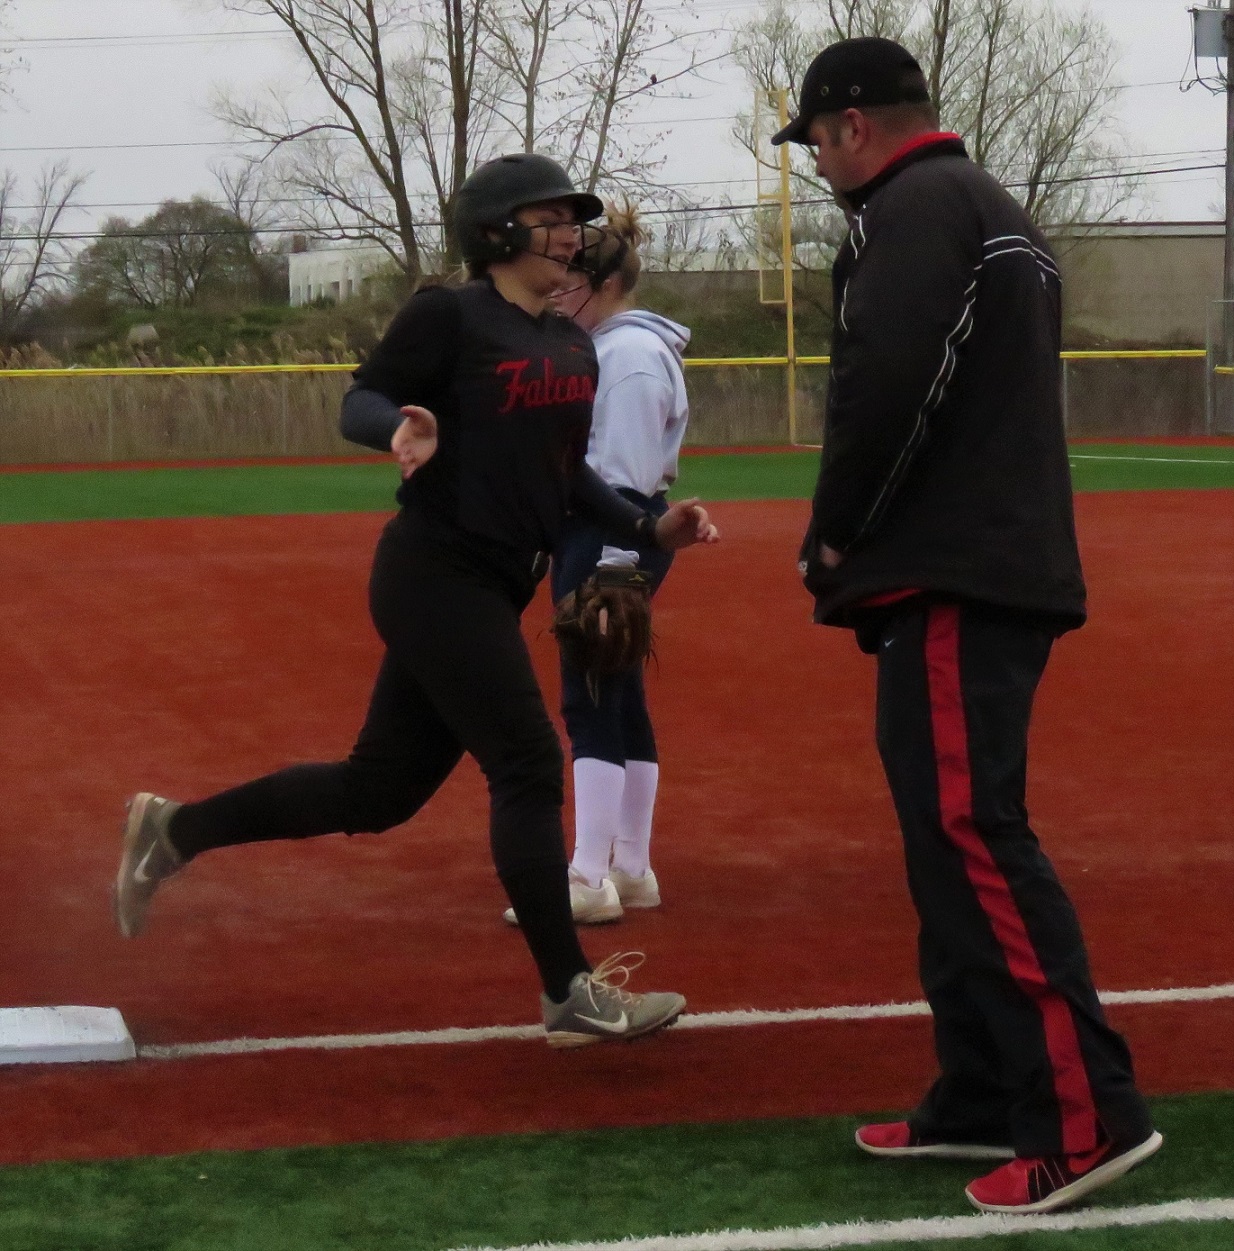 Niagara-Wheatfield's Mackenzie Quider receives a high-five from Falcons coach Jim Proefrock following her second home run versus Niagara Falls. The Falcons used four home runs to defeat the Wolverines, 14-6. (Photo by David Yarger)